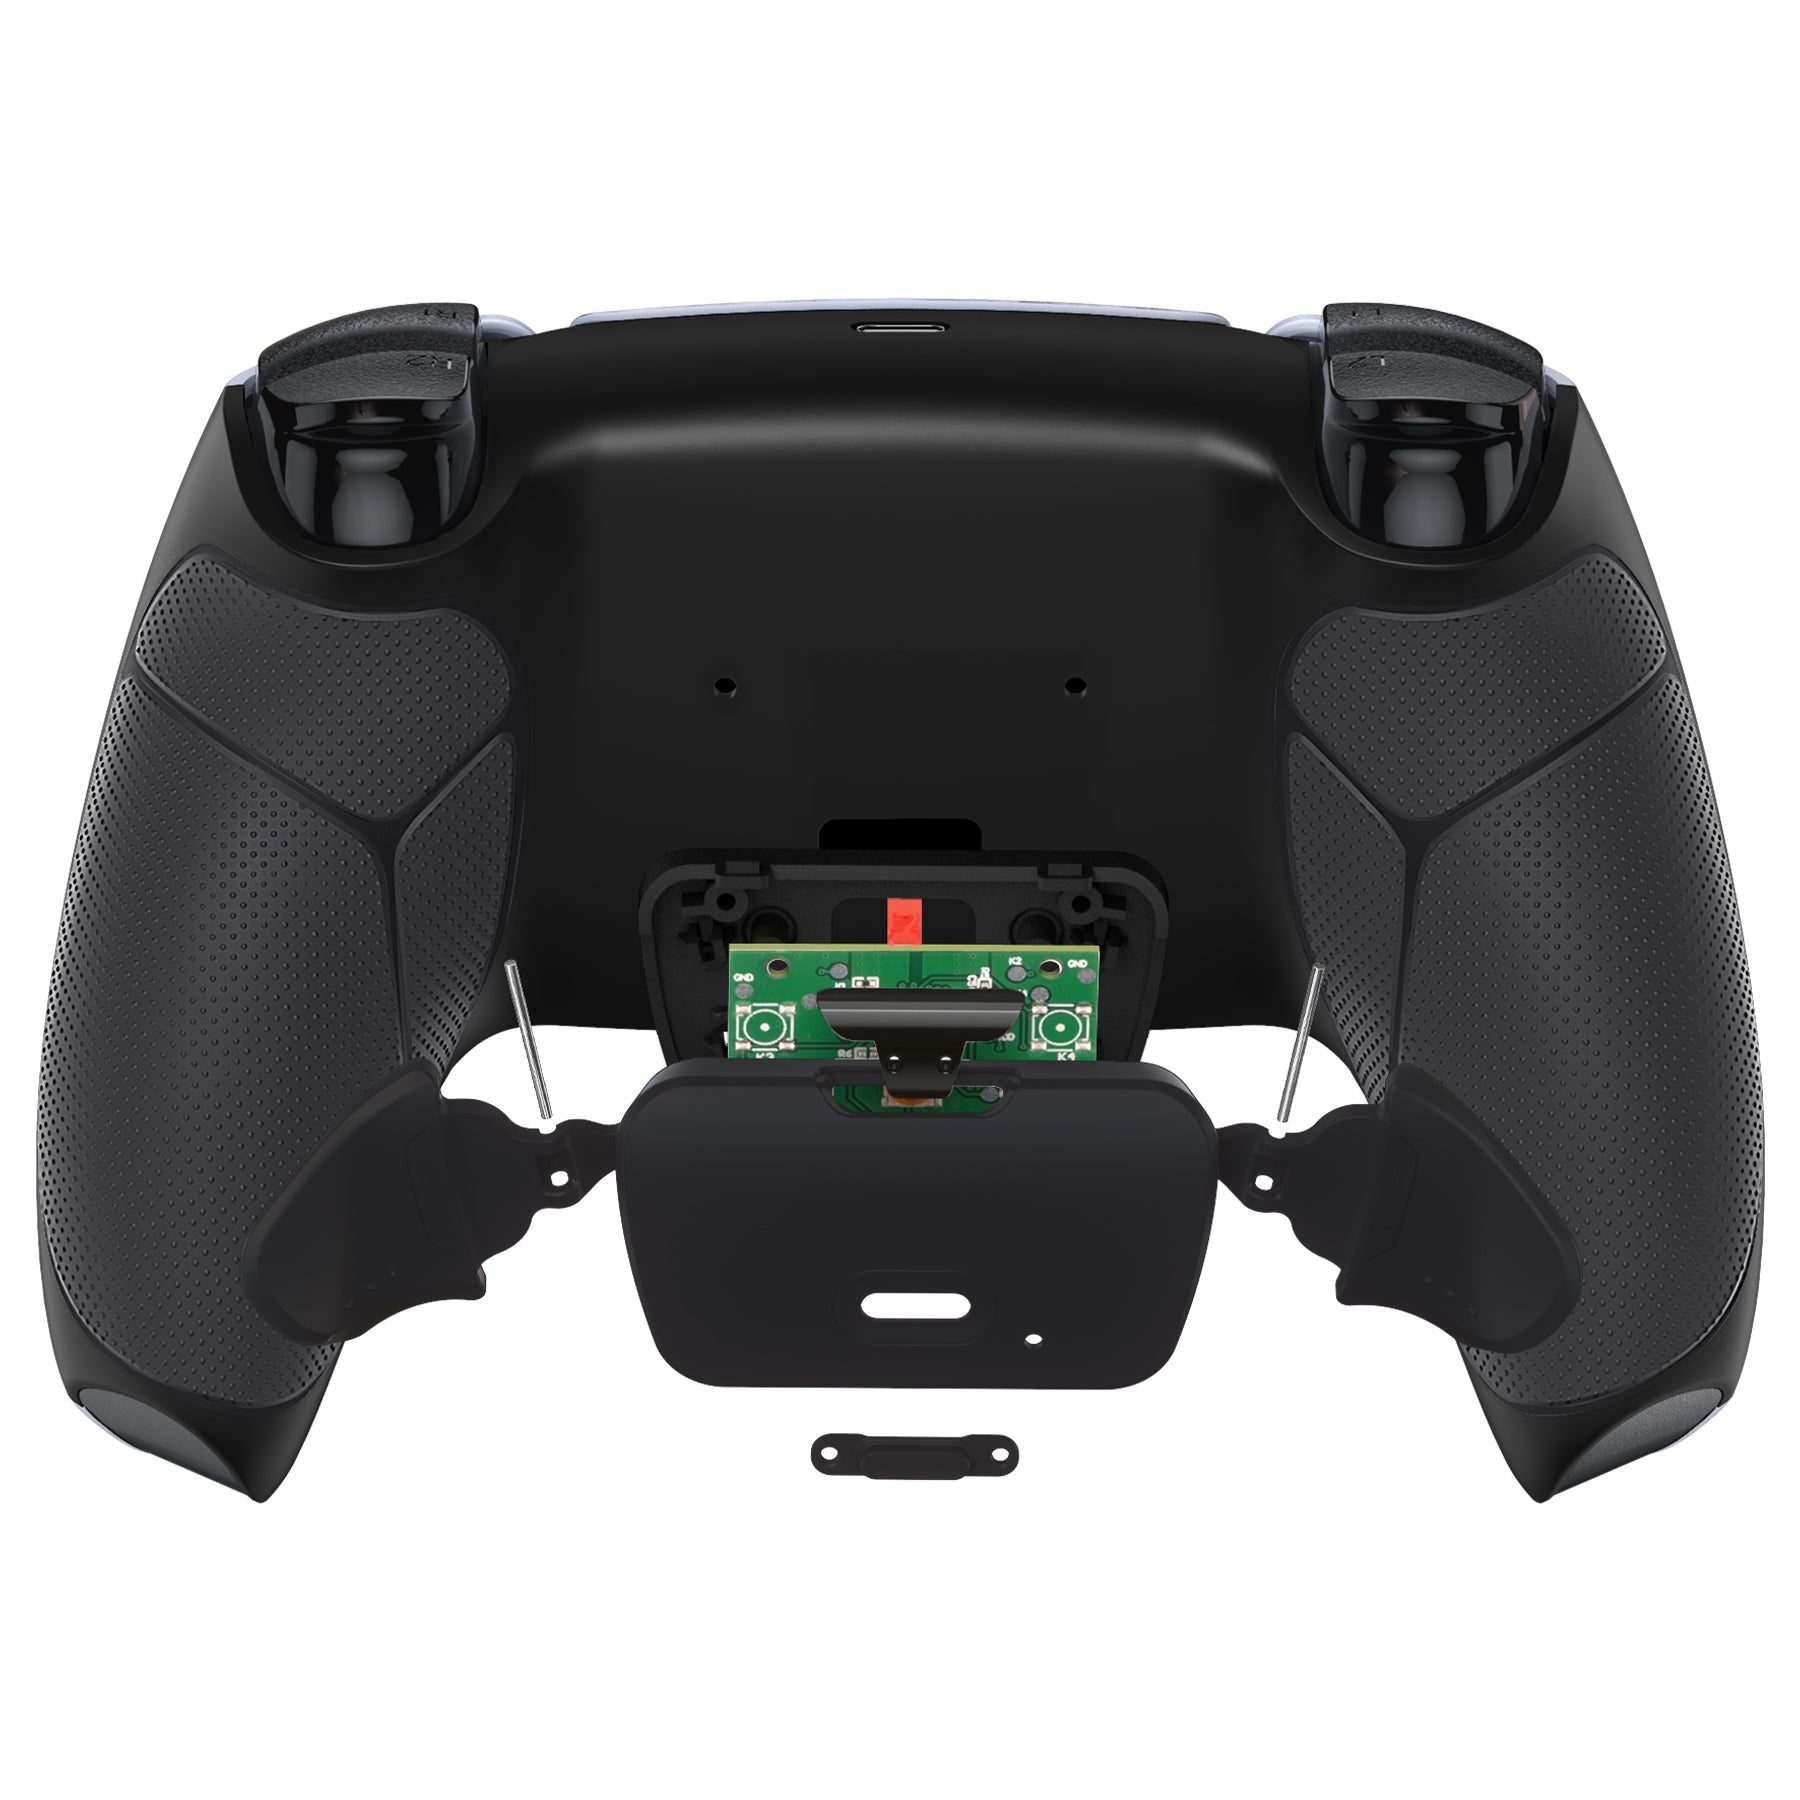 eXtremeRate Retail Black Rubberized Grip Remappable RISE Remap Kit for PS5 Controller BDM-030, Upgrade Board & Redesigned Black Back Shell & Back Buttons for PS5 Controller - Controller NOT Included - XPFU6001G3